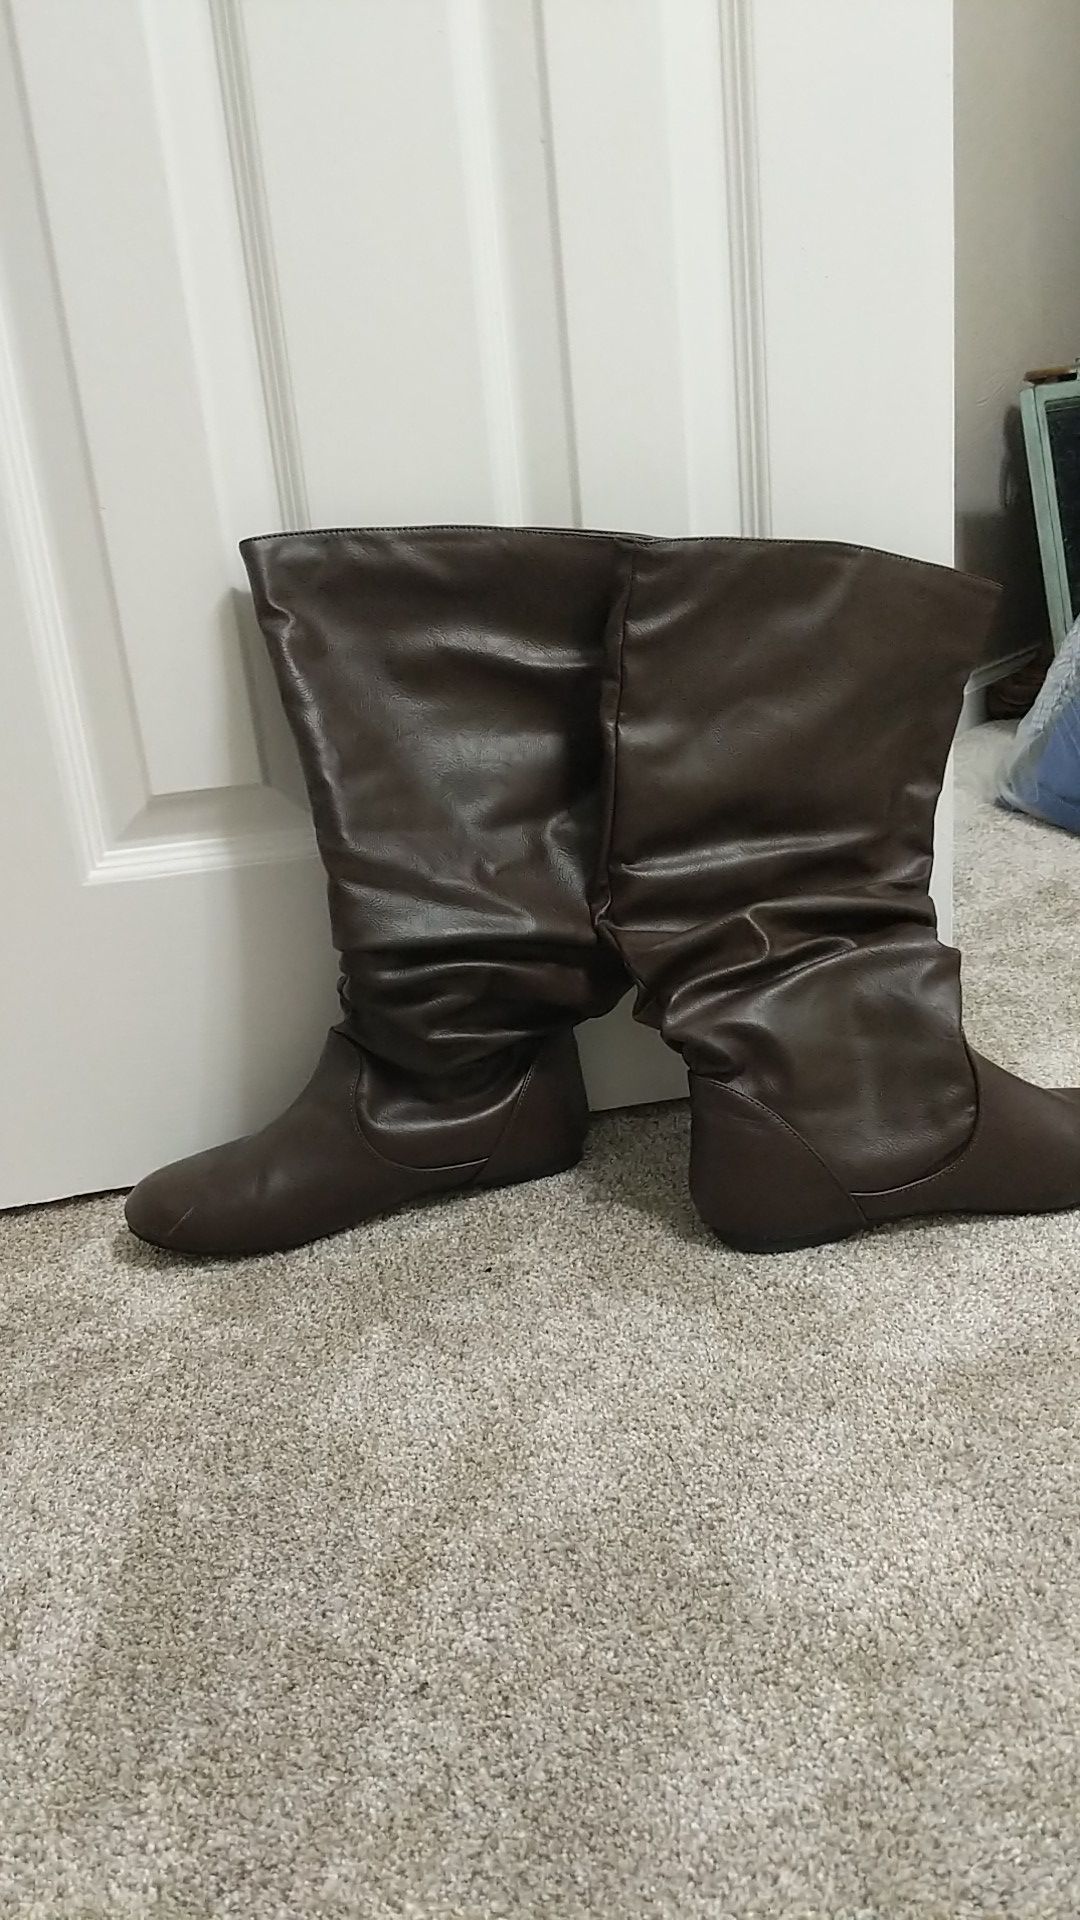 Brand new never worn boots